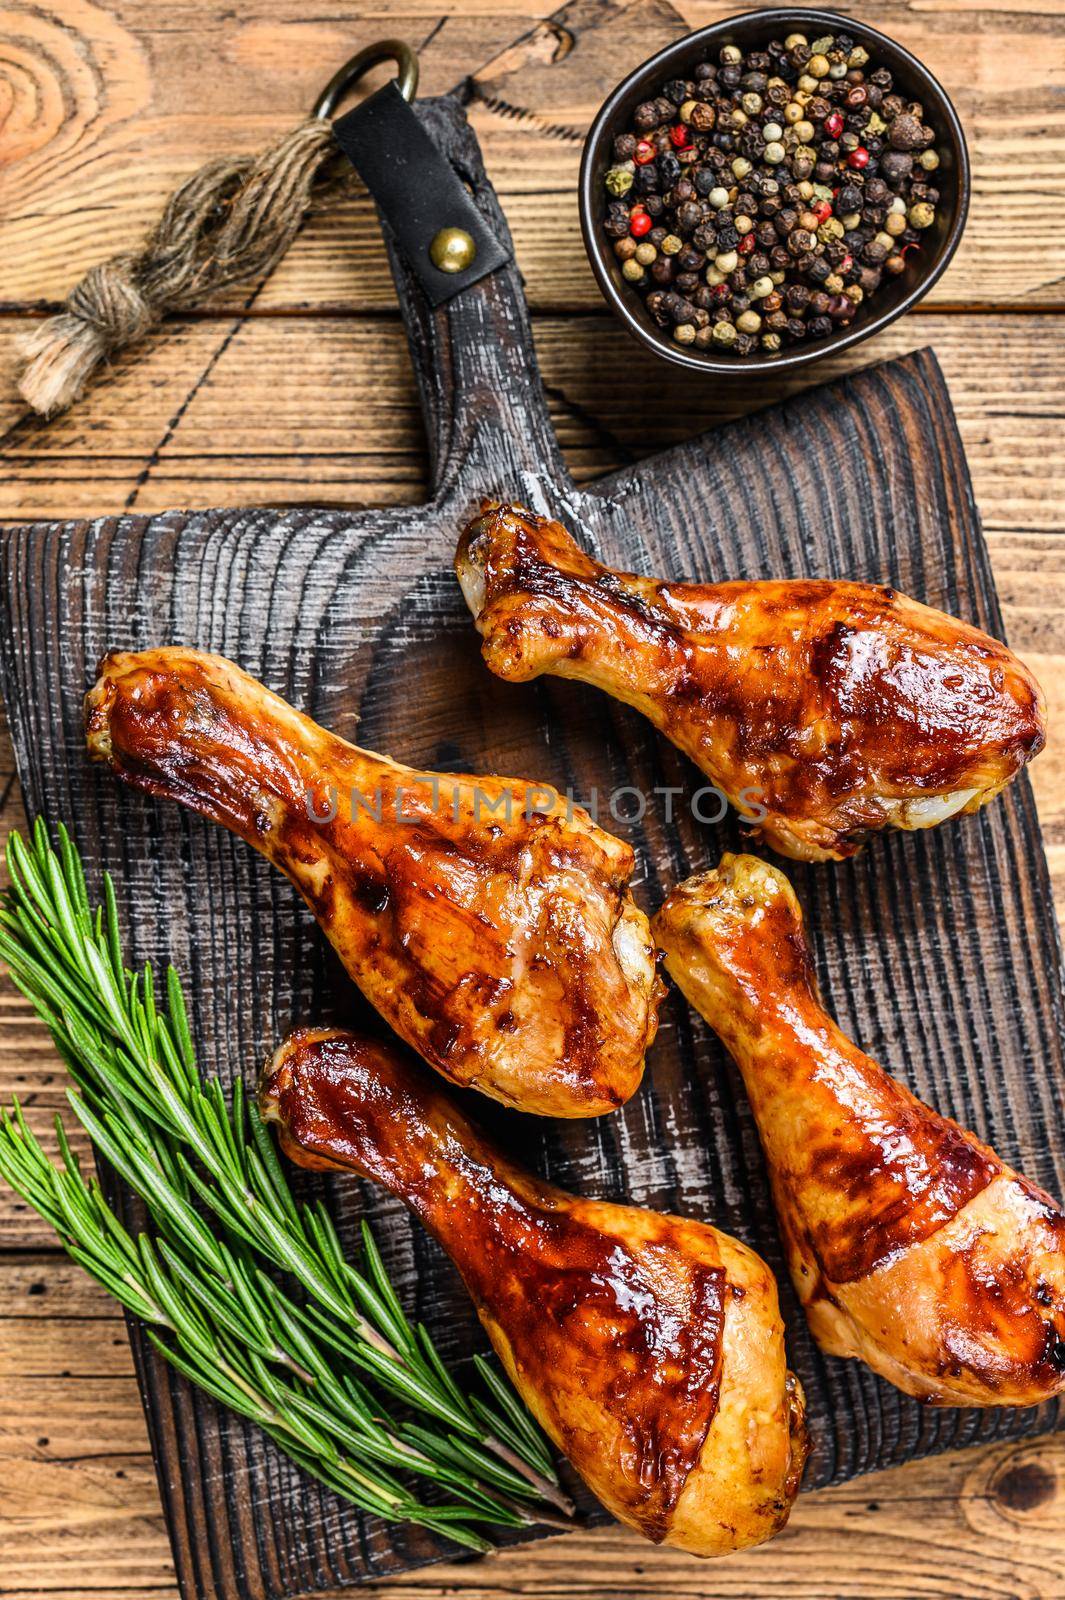 Barbecue roasted chicken drumsticks on a wooden cutting board. wooden background. top view by Composter